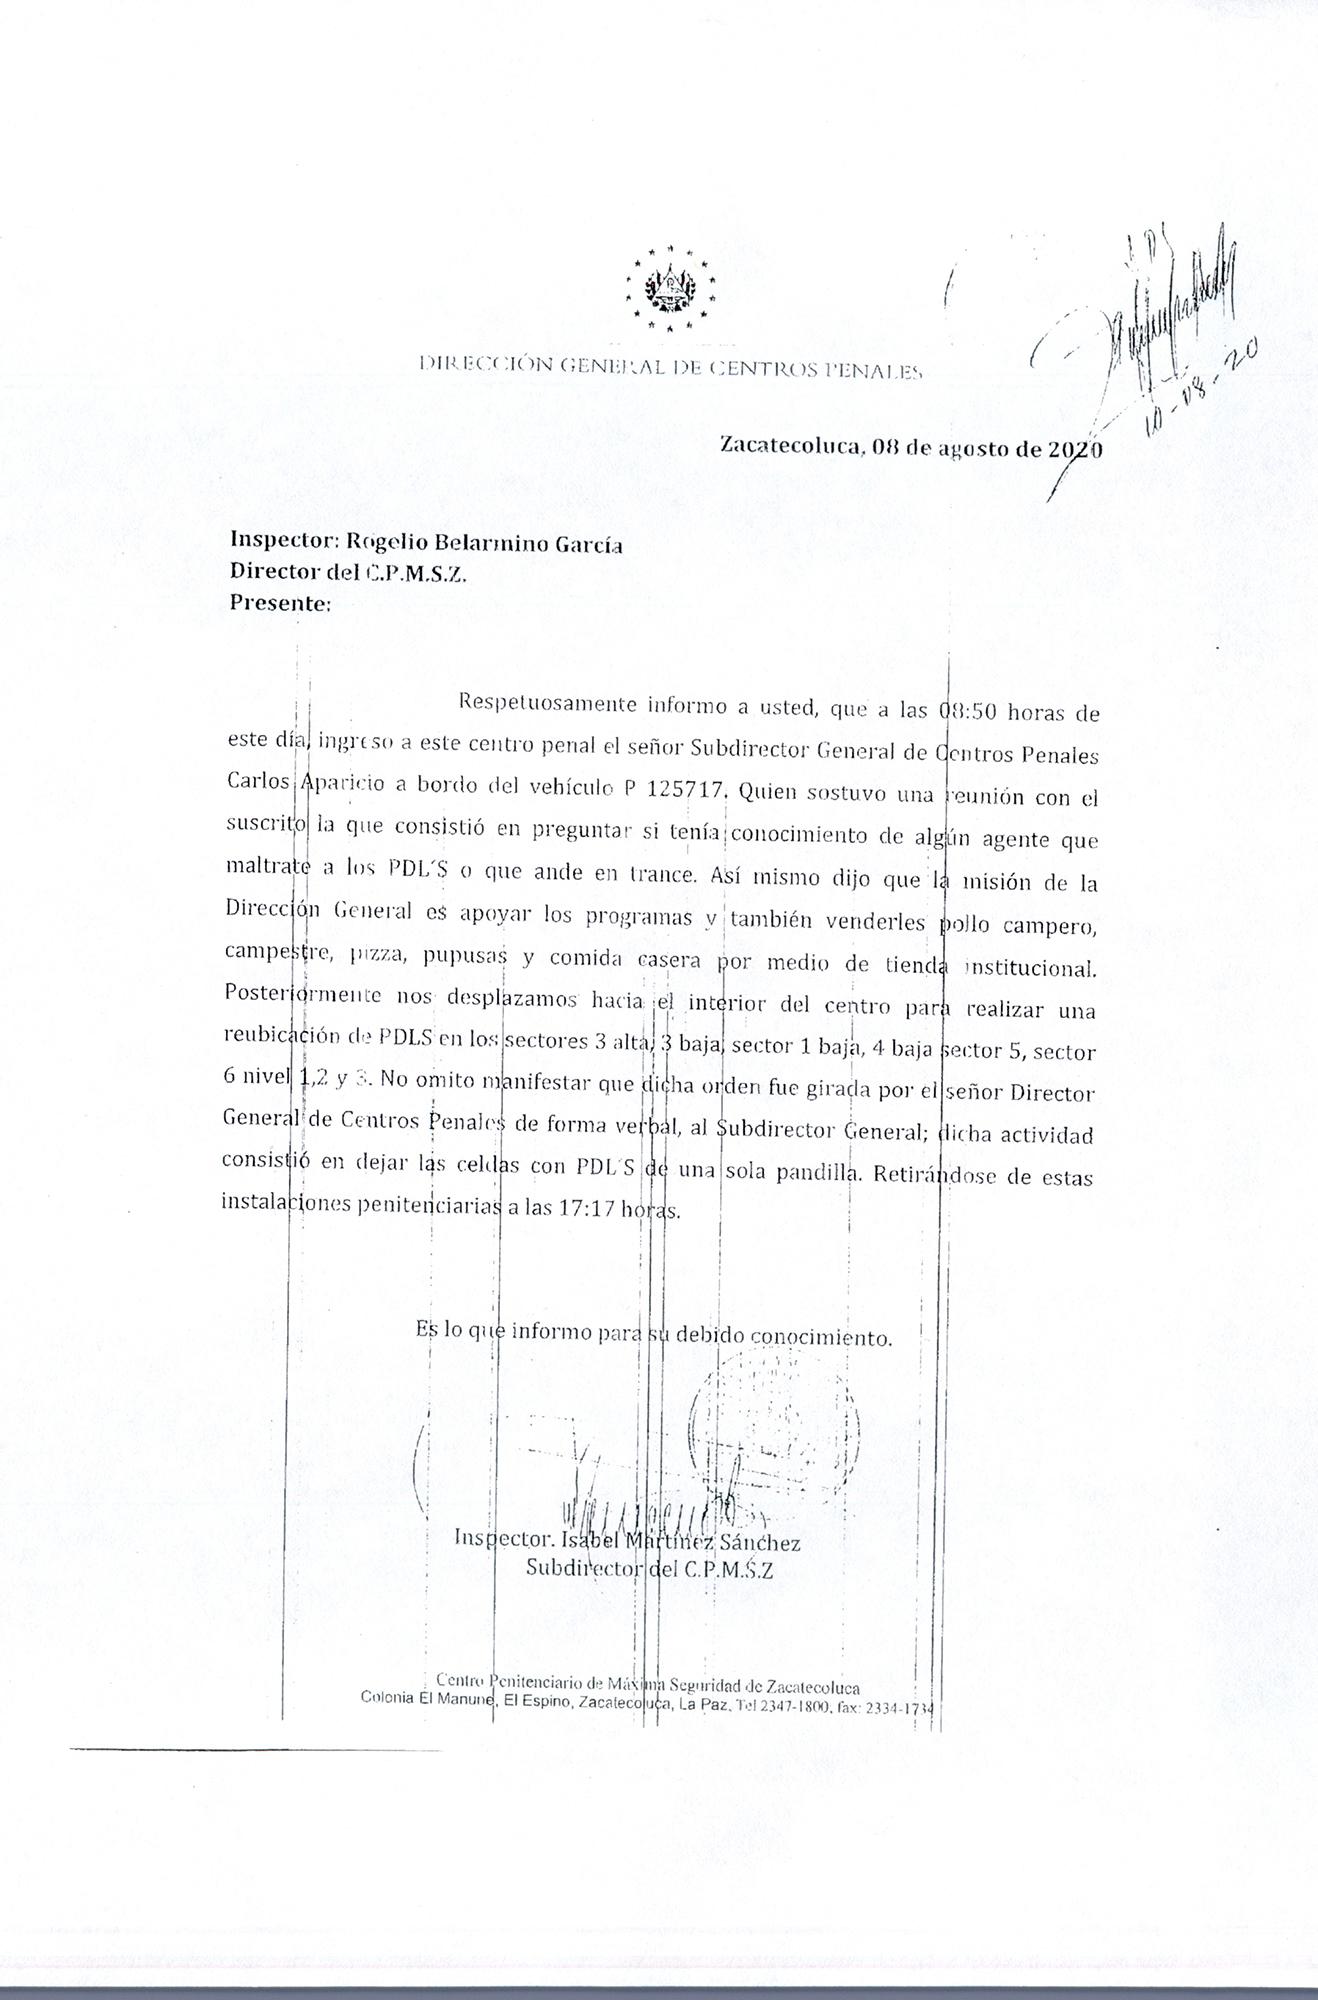 In this memorandum the maximum-security facility Zacatecoluca deputy warden states that Osiris Luna himself ordered the reversal of the decision to merge the cell blocks of opposing gangs and to return to the norm of gang-based segregation within the facilities. A source within Centros Penales, the prison administration headed by Luna, confirmed to El Faro that the reversal had been instituted across all prisons housing gangs.